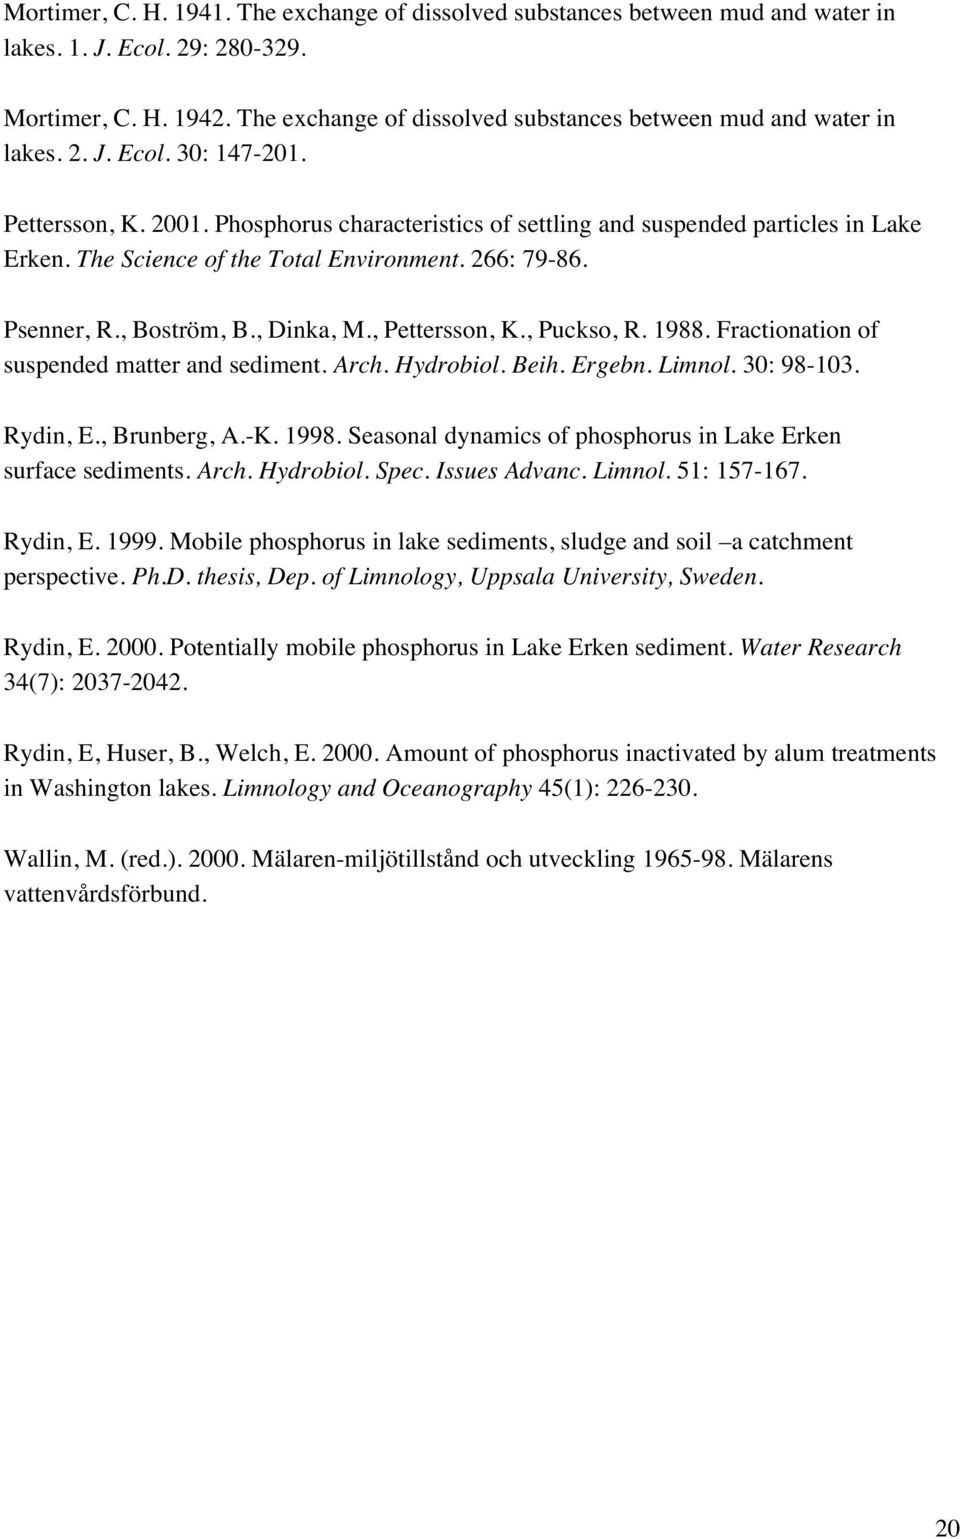 The Science of the Total Environment. 266: 79-86. Psenner, R., Boström, B., Dinka, M., Pettersson, K., Puckso, R. 1988. Fractionation of suspended matter and sediment. Arch. Hydrobiol. Beih. Ergebn.